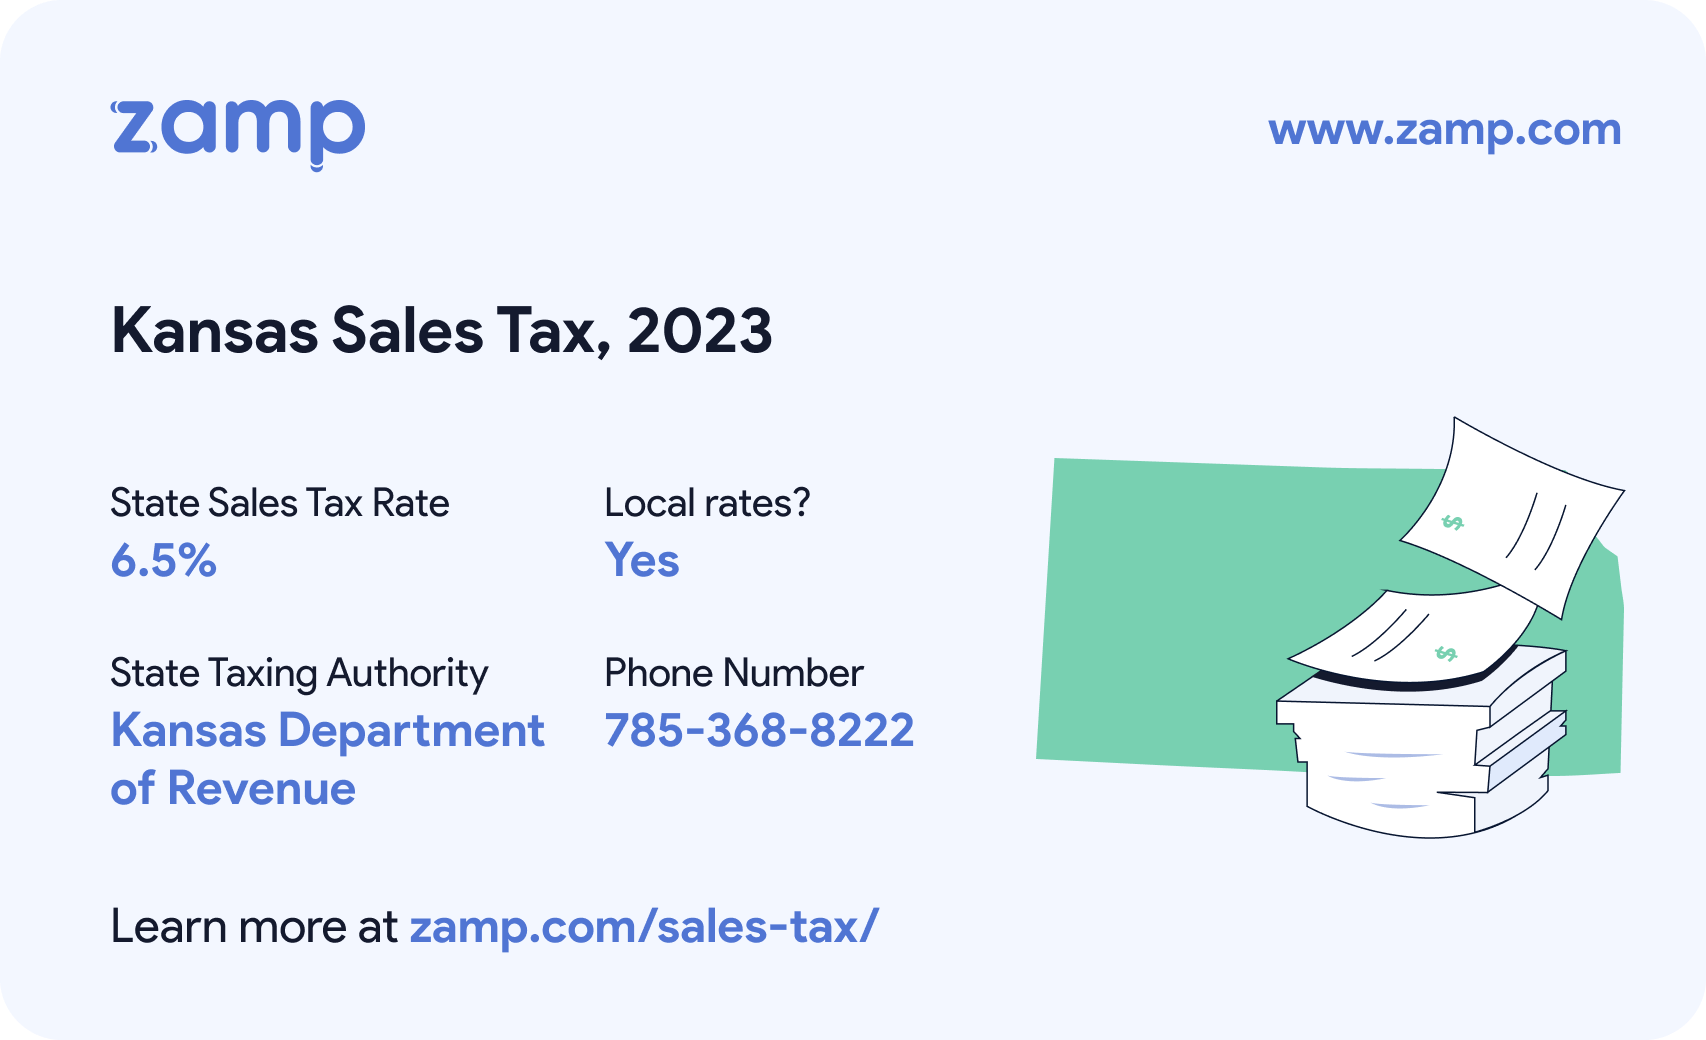 Kansas basic sales tax info for 2023 - State sales tax rate: 6.5%, Local rates? Yes; State Taxing Authority: Kansas Department of Revenue; and phone number 785-368-8222